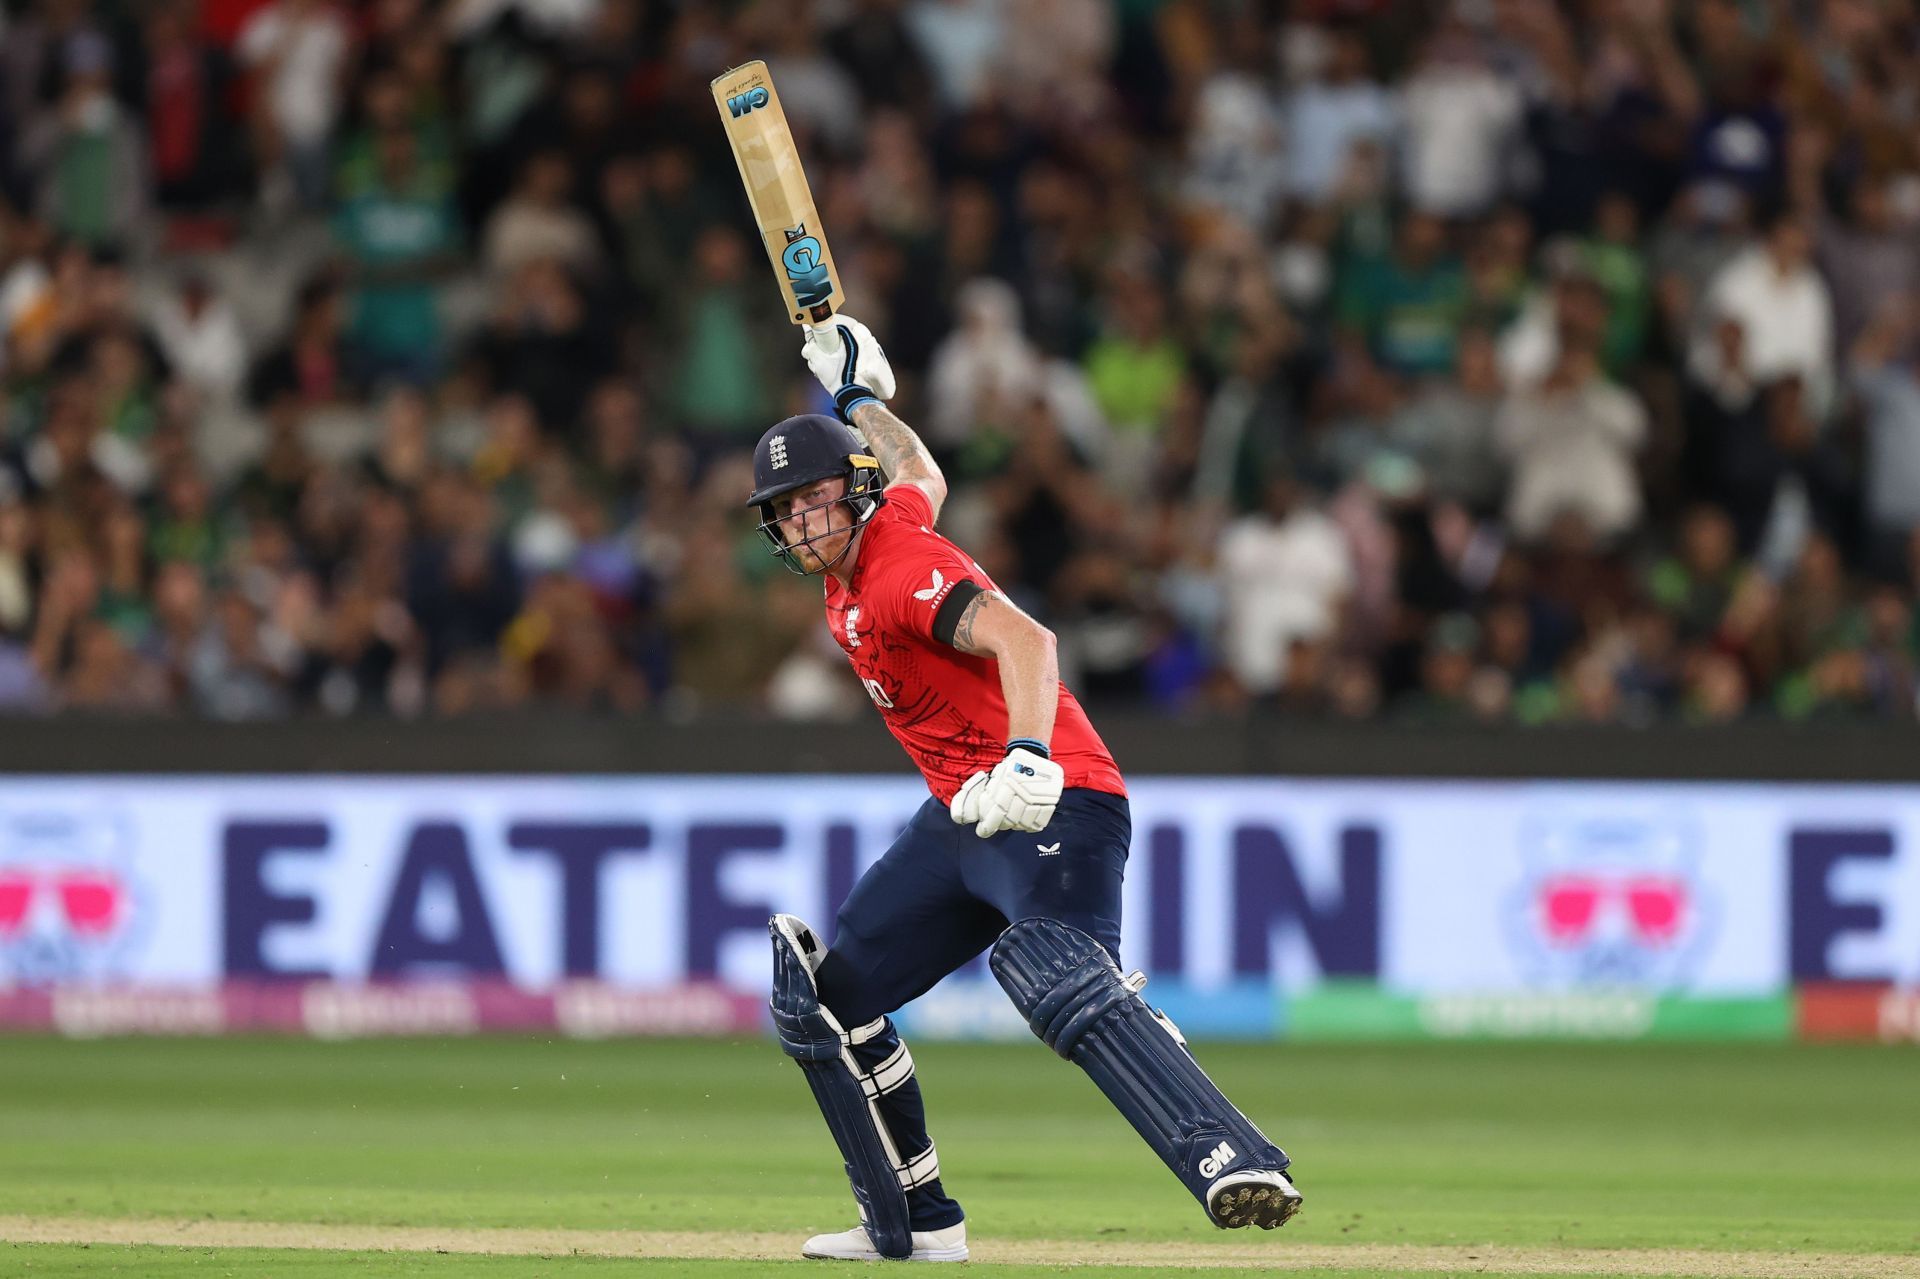 Ben Stokes stayed unbeaten at 52 off 49 balls. (Credits: Getty)